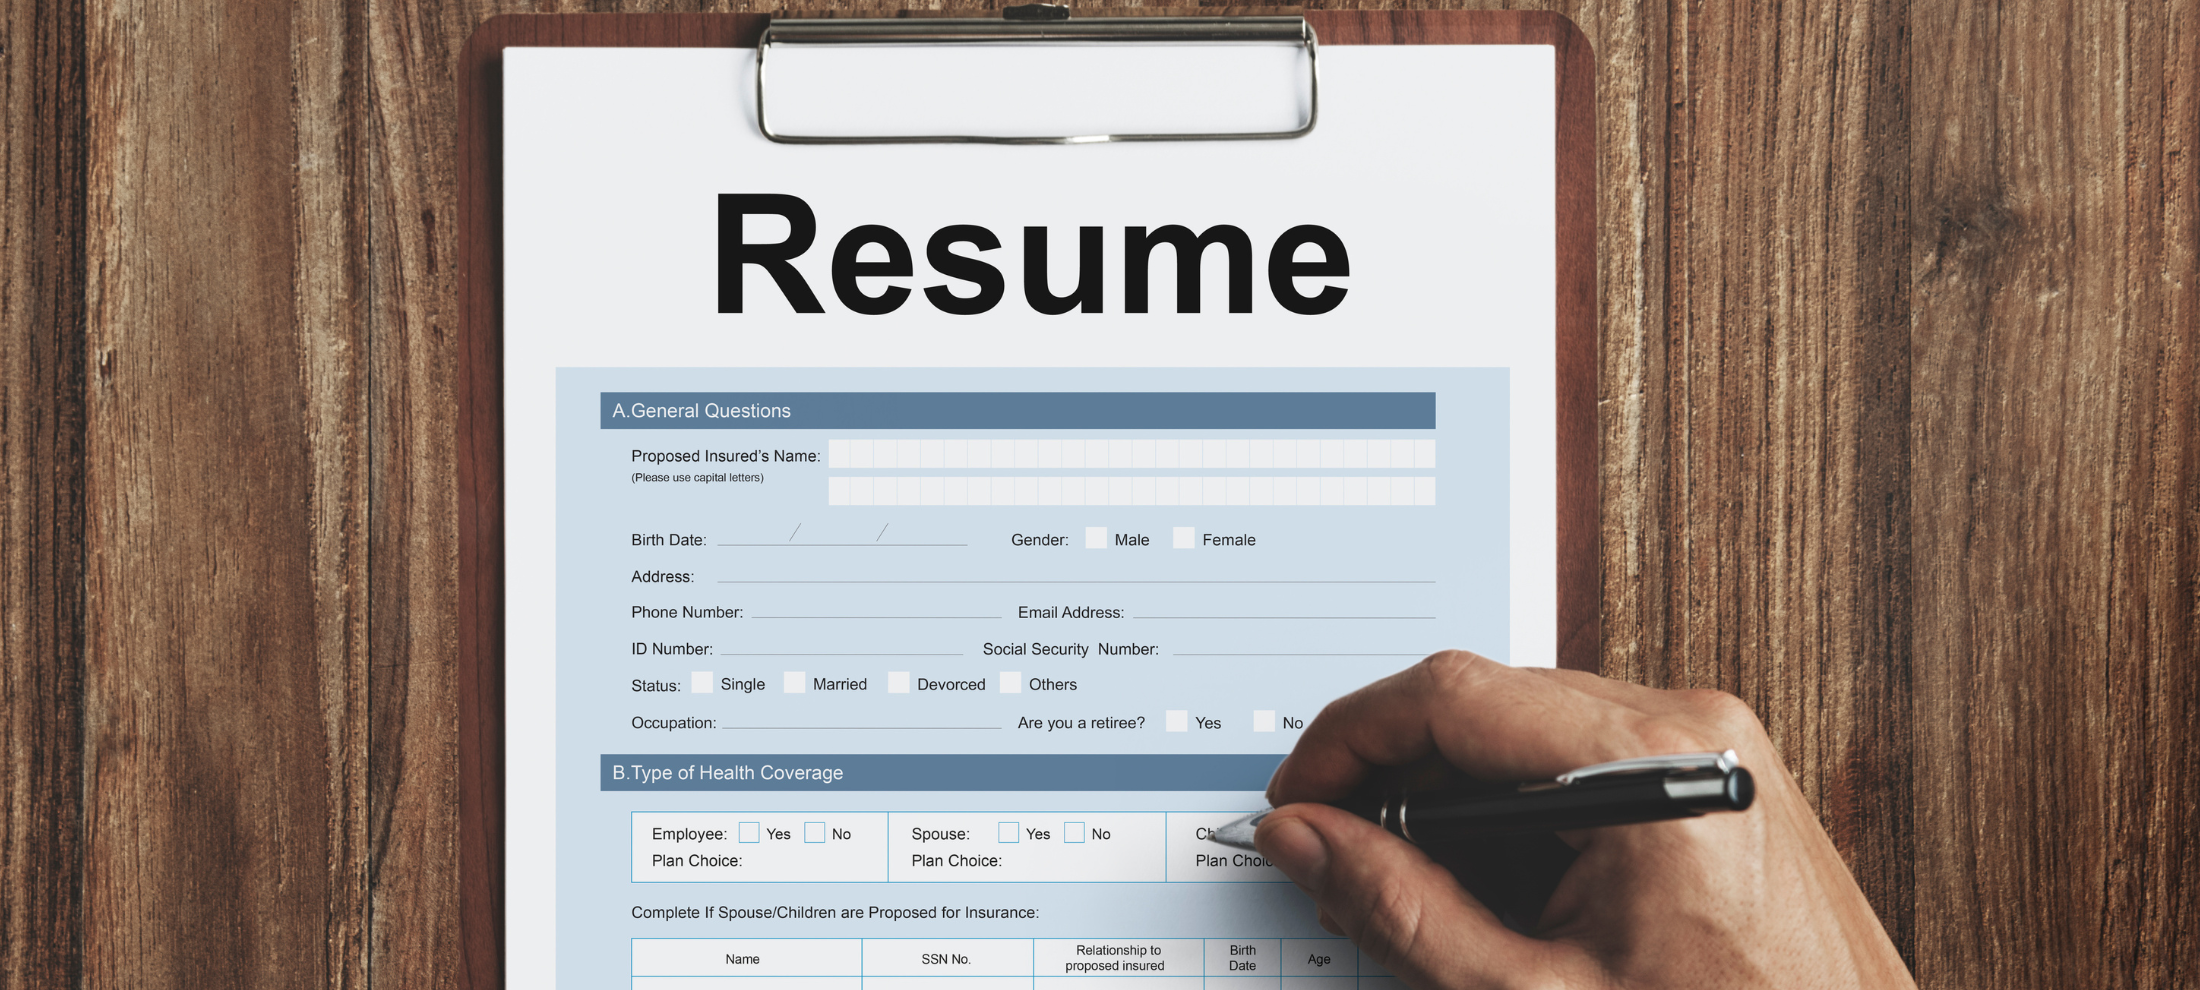 What are the job requirements?